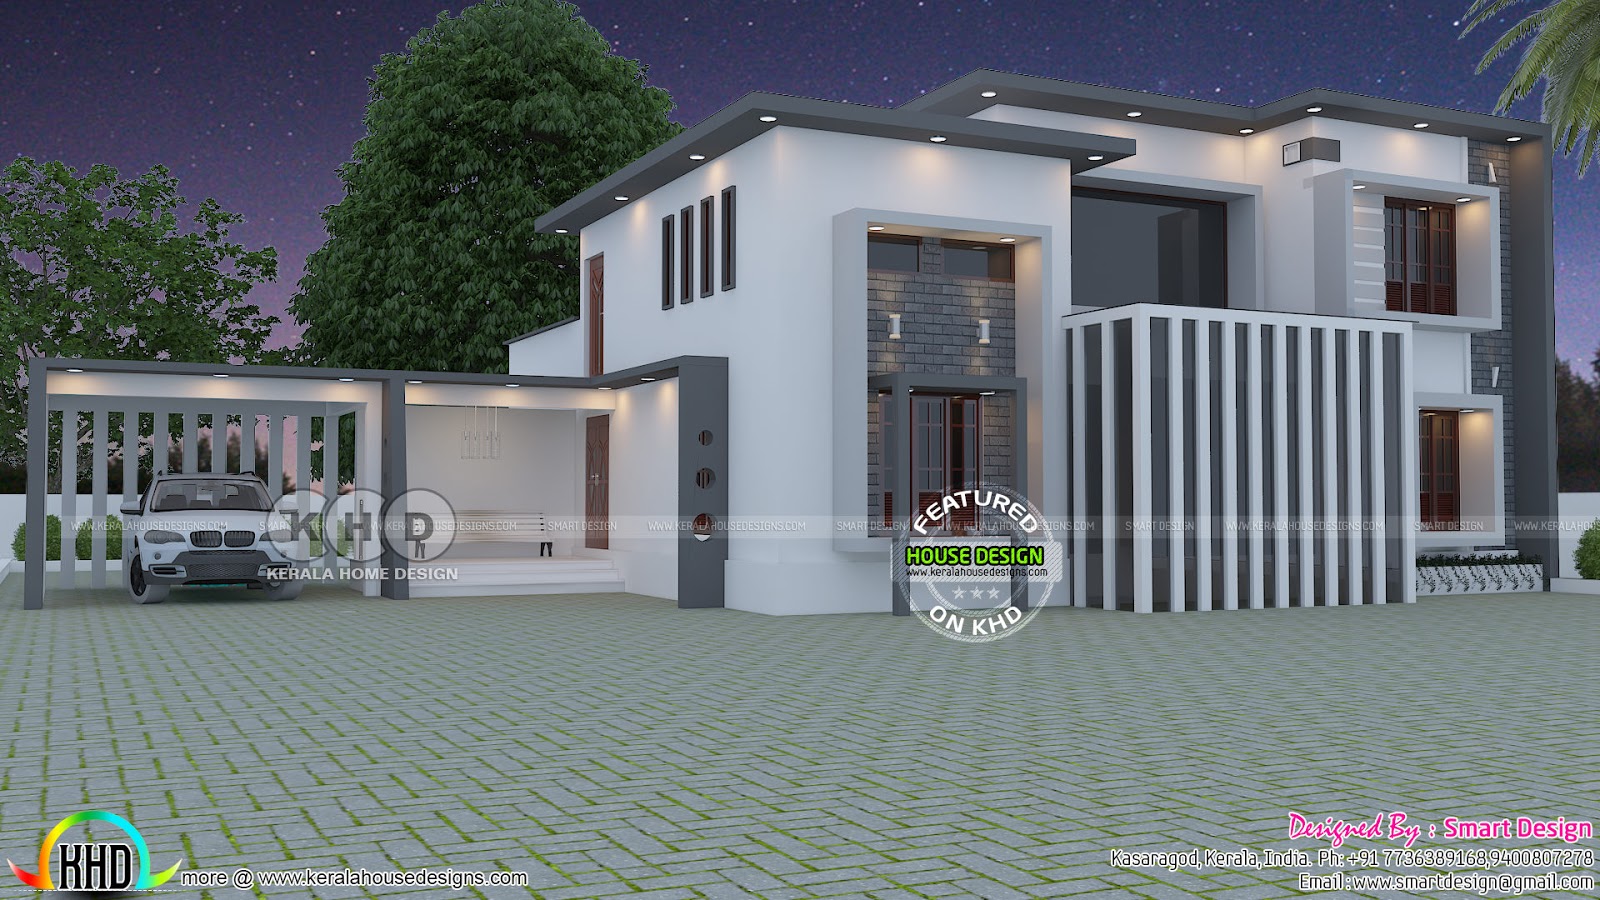 2860 sq-ft 5 BHK modern contemporary home - Kerala home design and